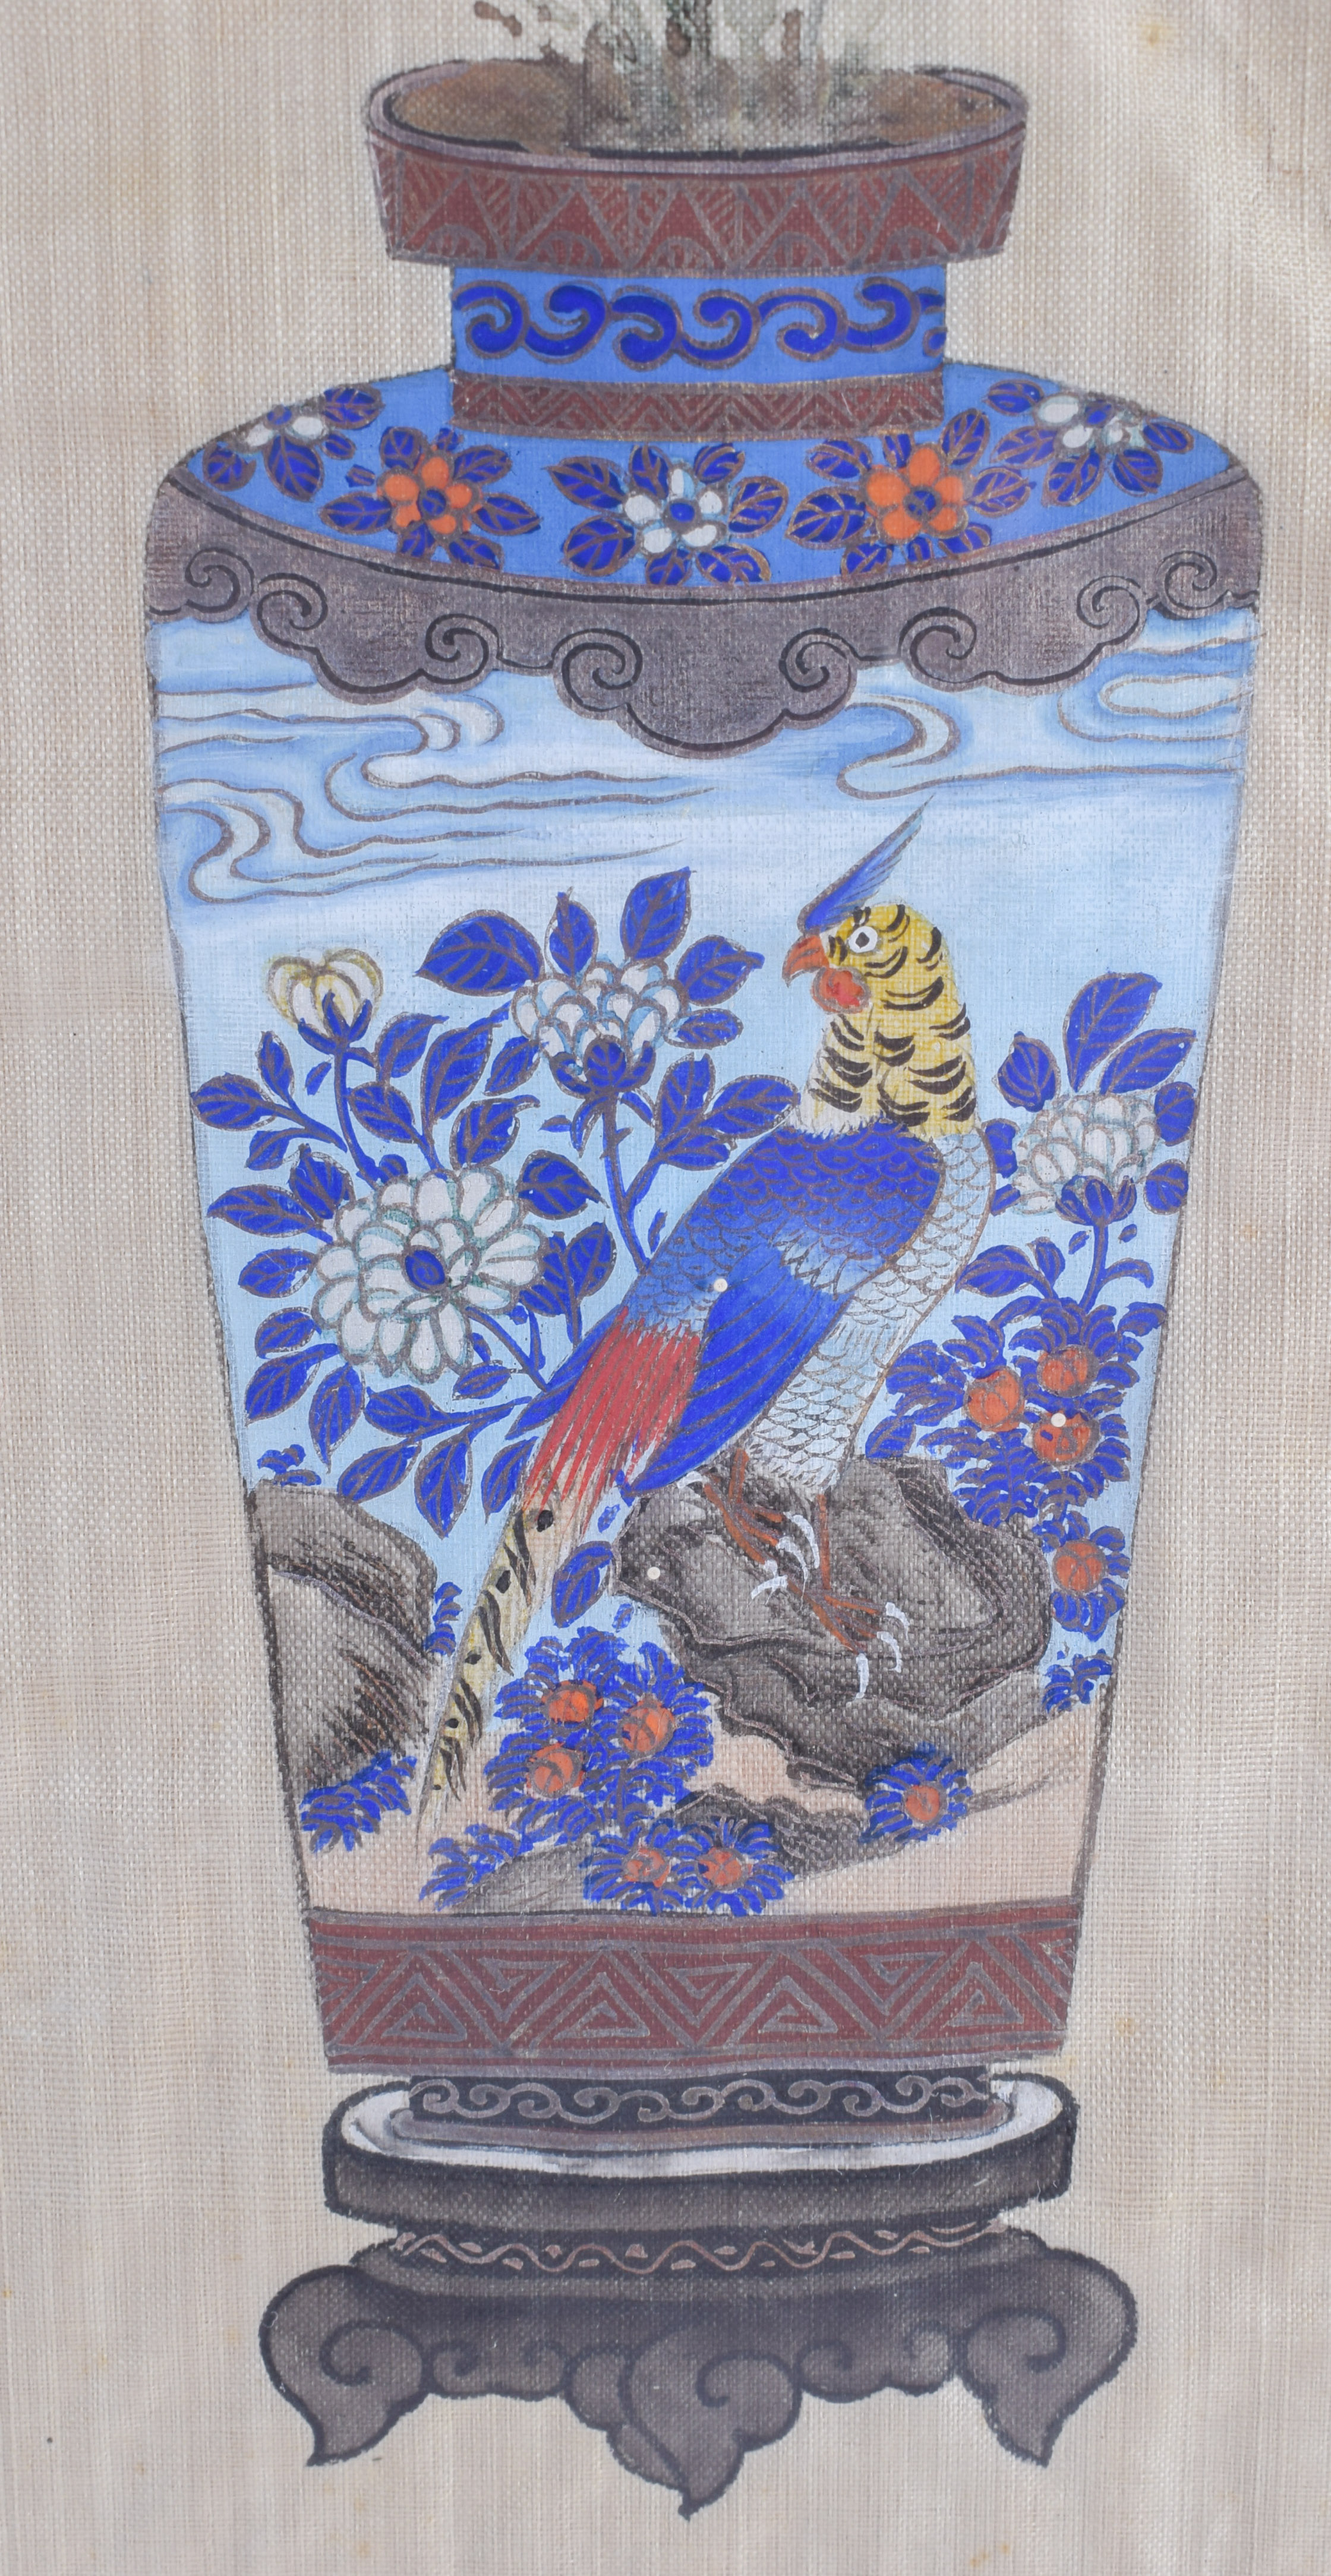 A PAIR OF 19TH CENTURY CHINESE WATERCOLOUR PANELS Qing, depicting still lifes. Image 39 cm x 46 cm. - Image 3 of 8